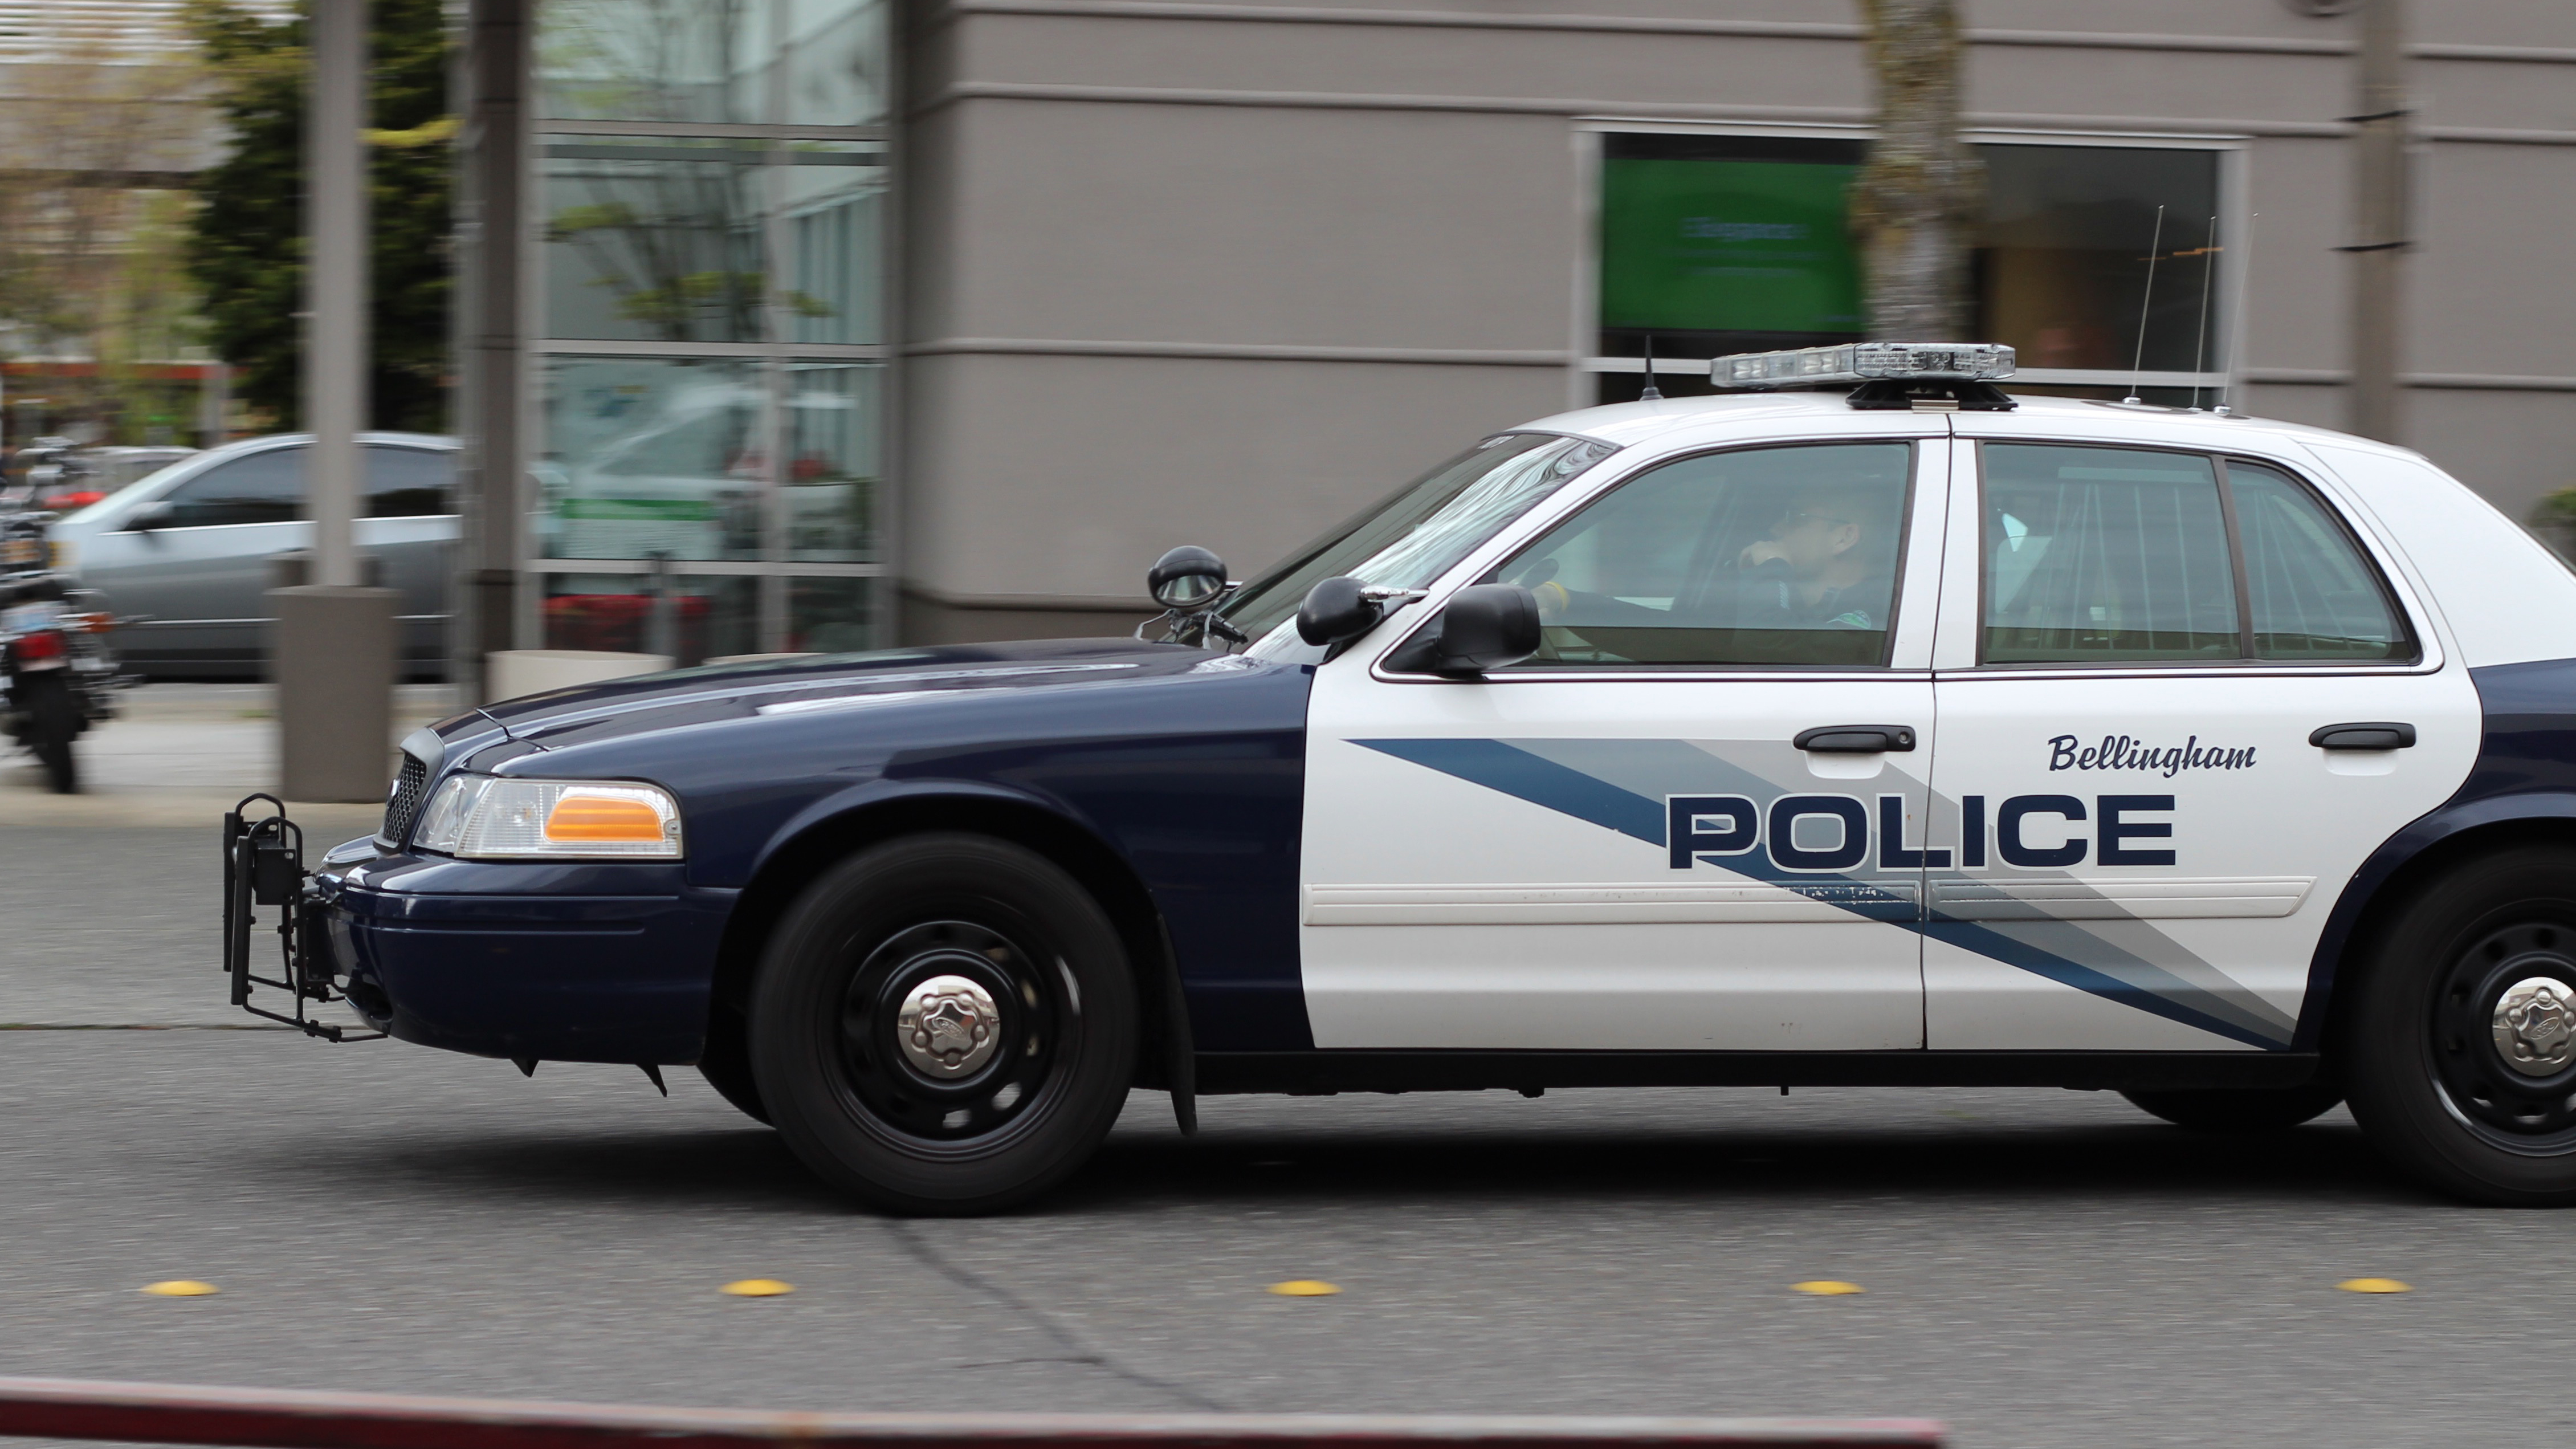 Ford crown victoria: bellingham police (9079) photo